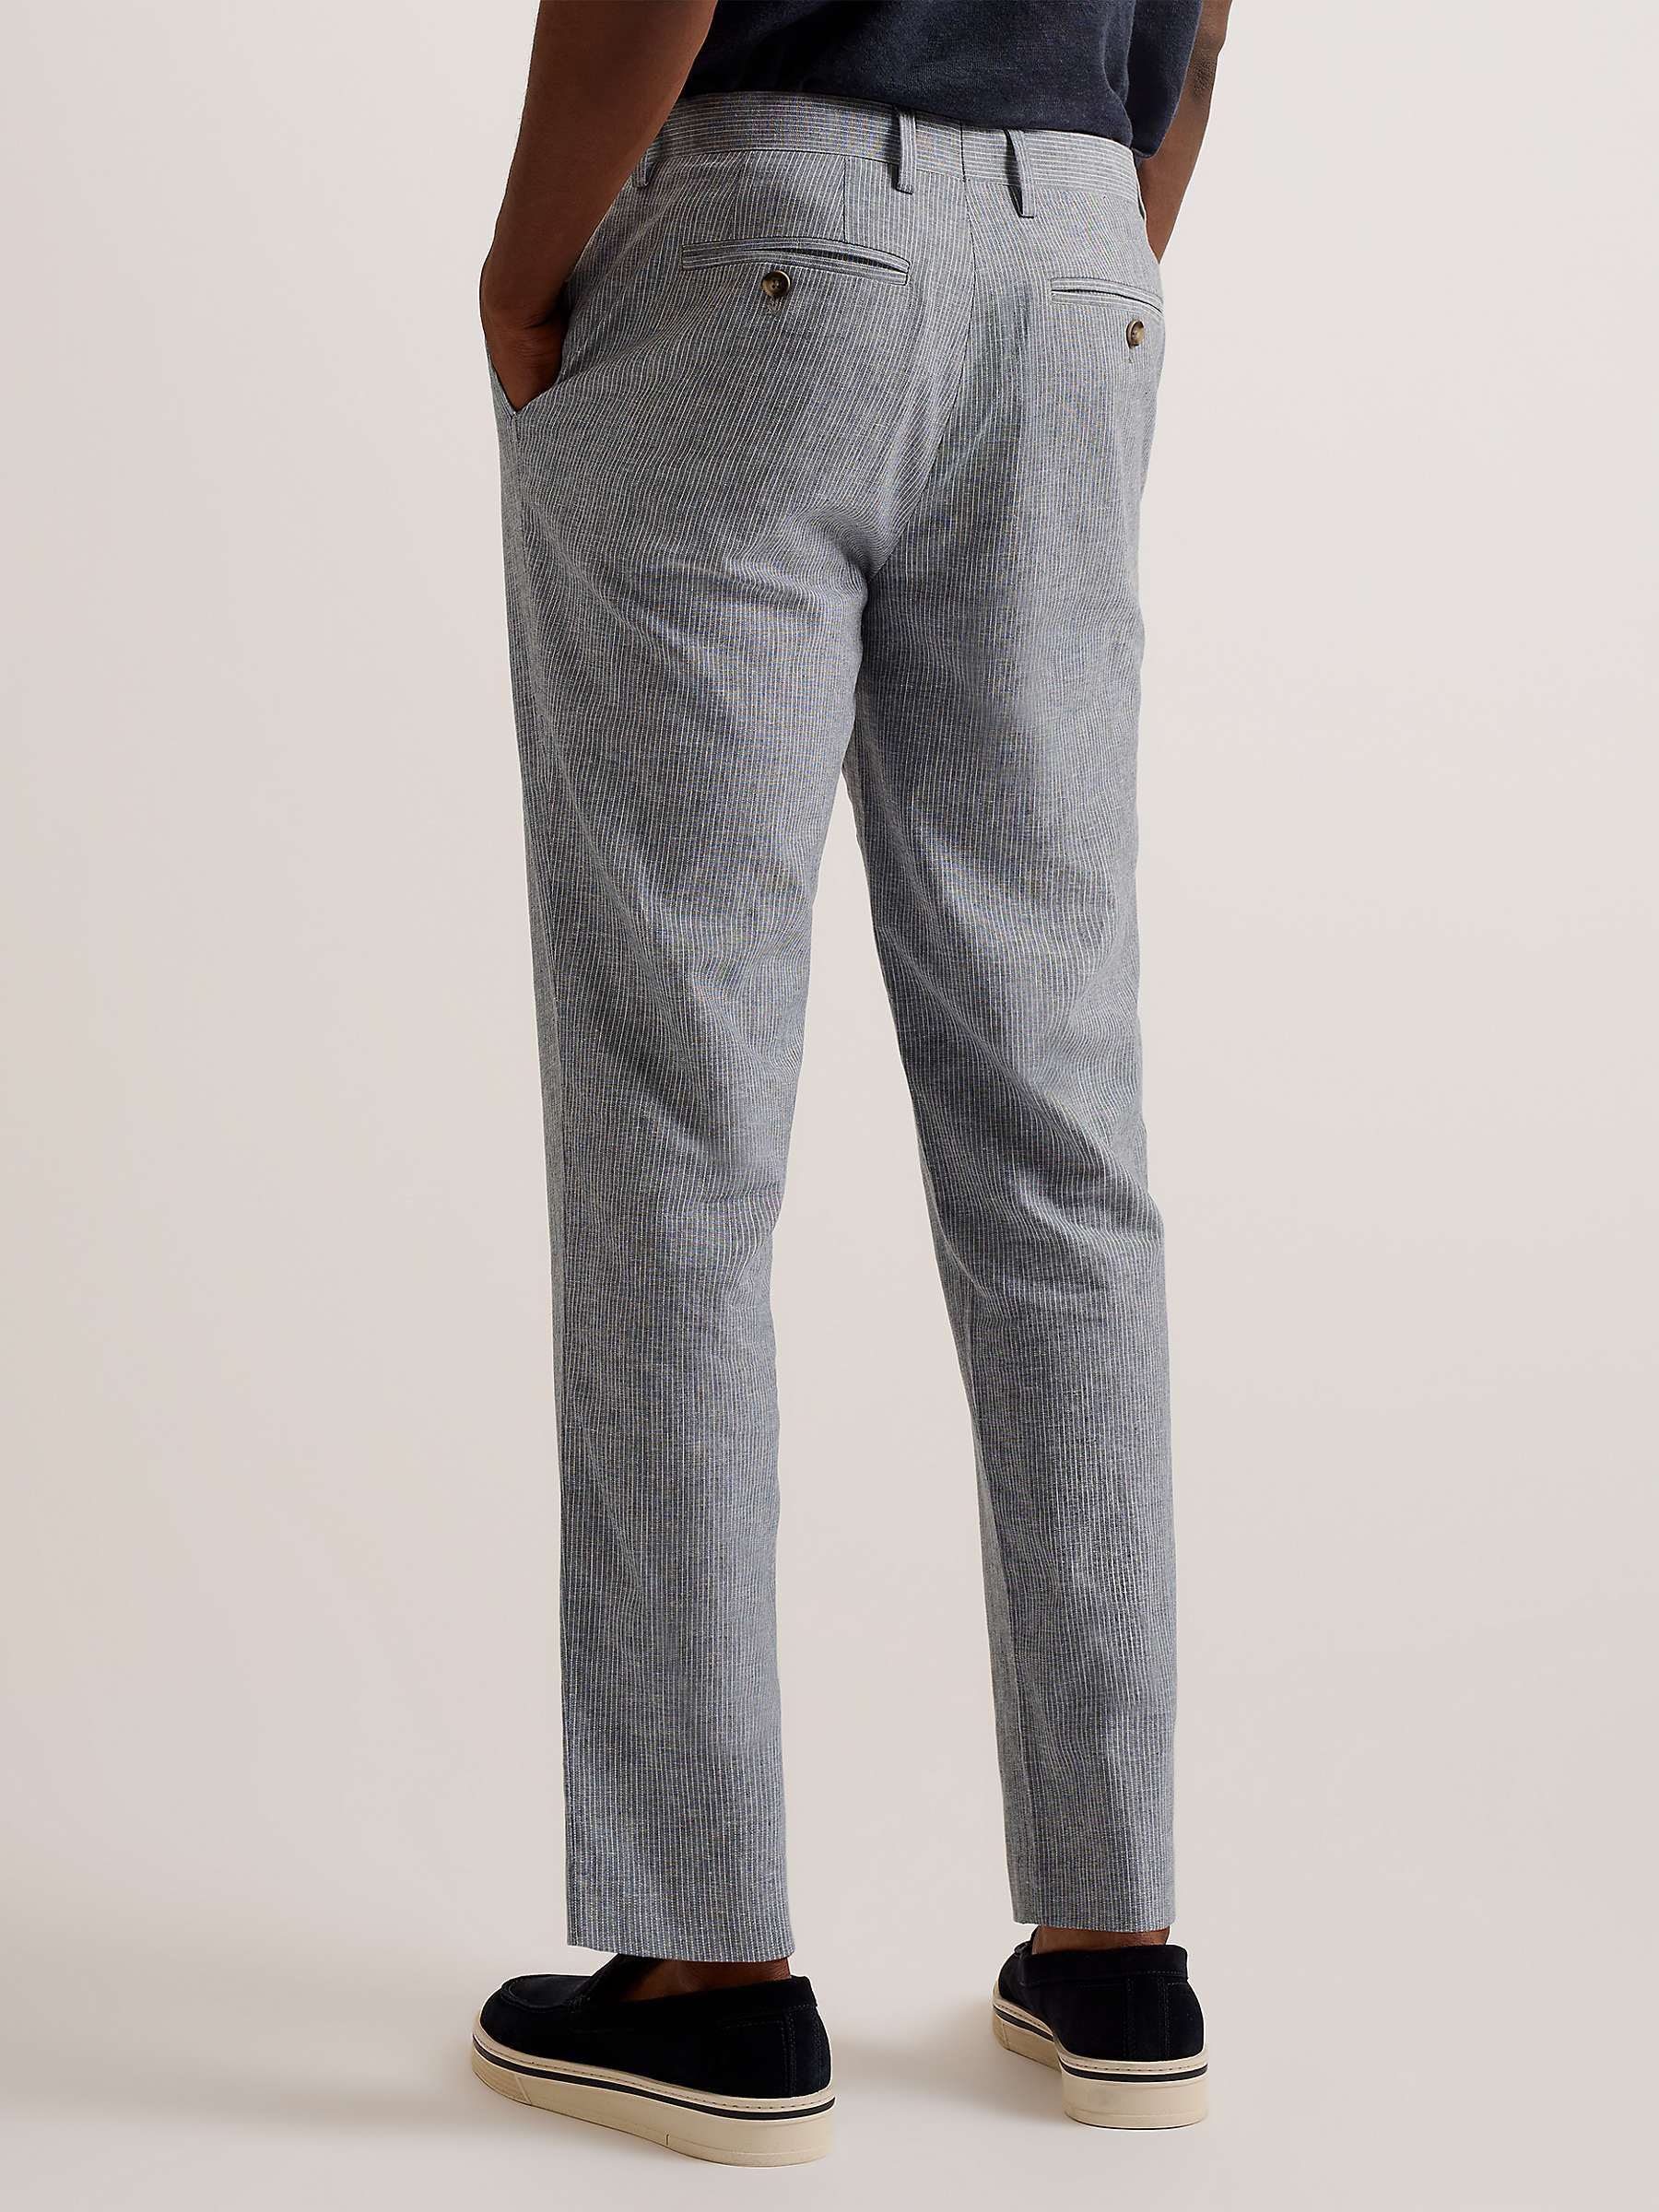 Buy Ted Baker Pinstripe Slim Tailored Trousers, Light Grey Online at johnlewis.com